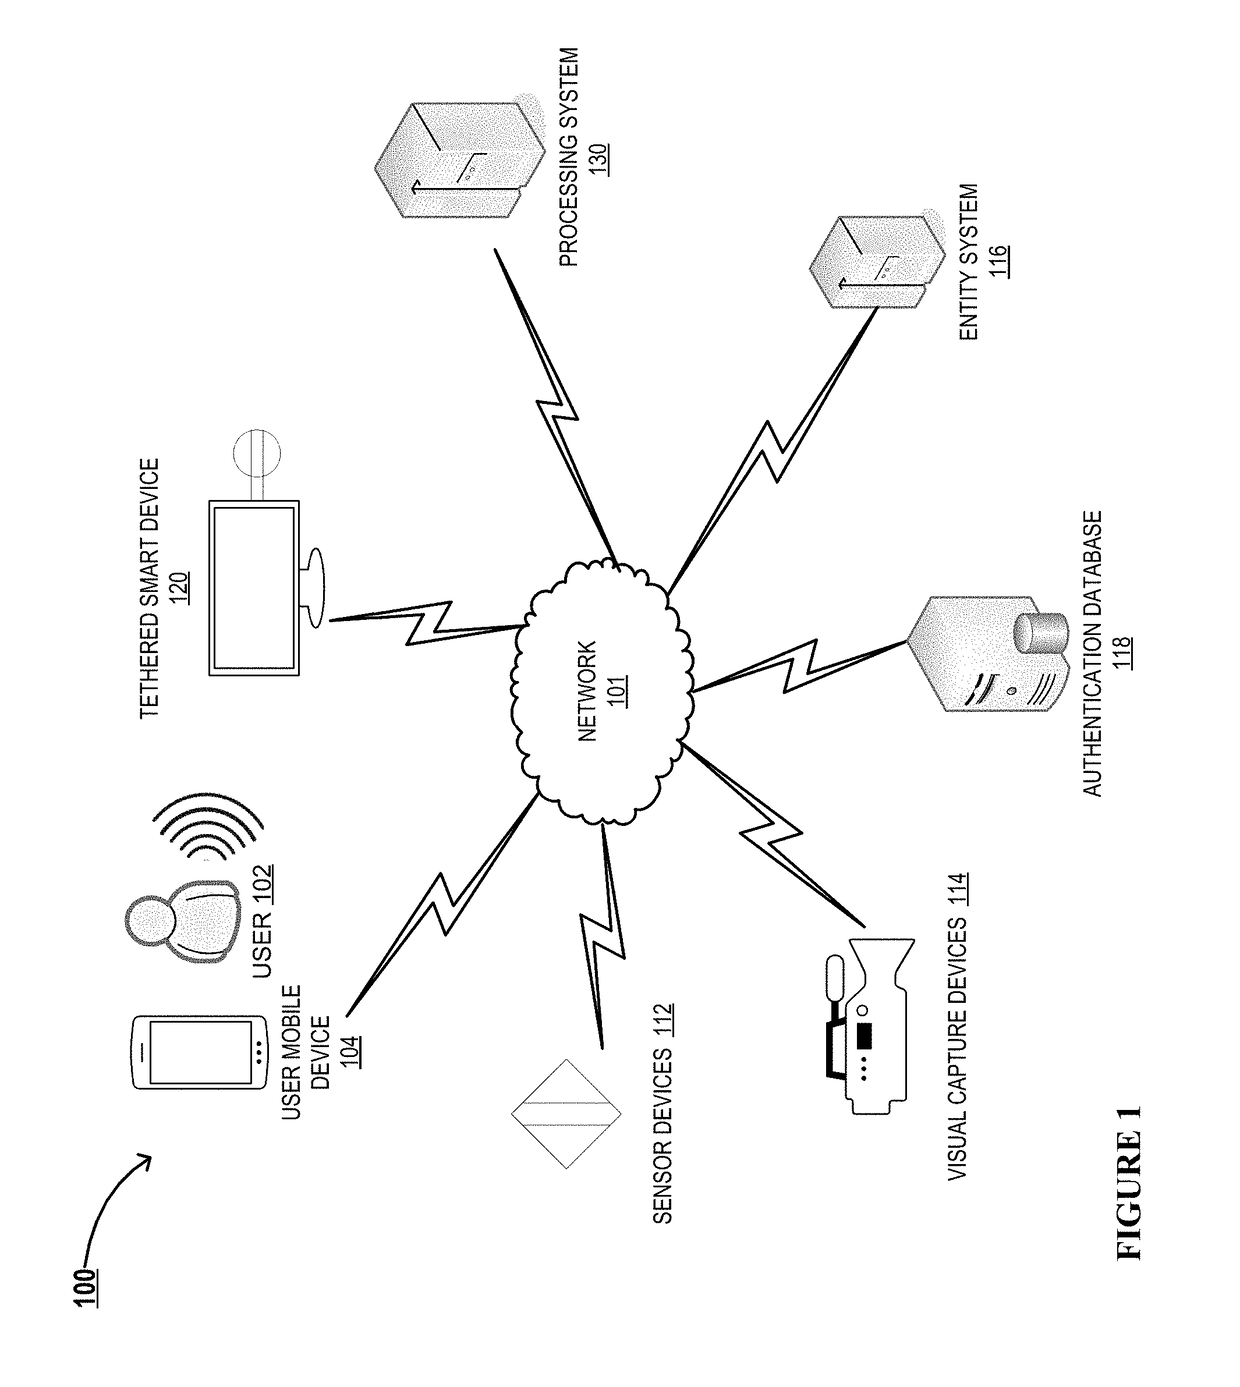 Technology application restructuring and deployment for home receiver integration